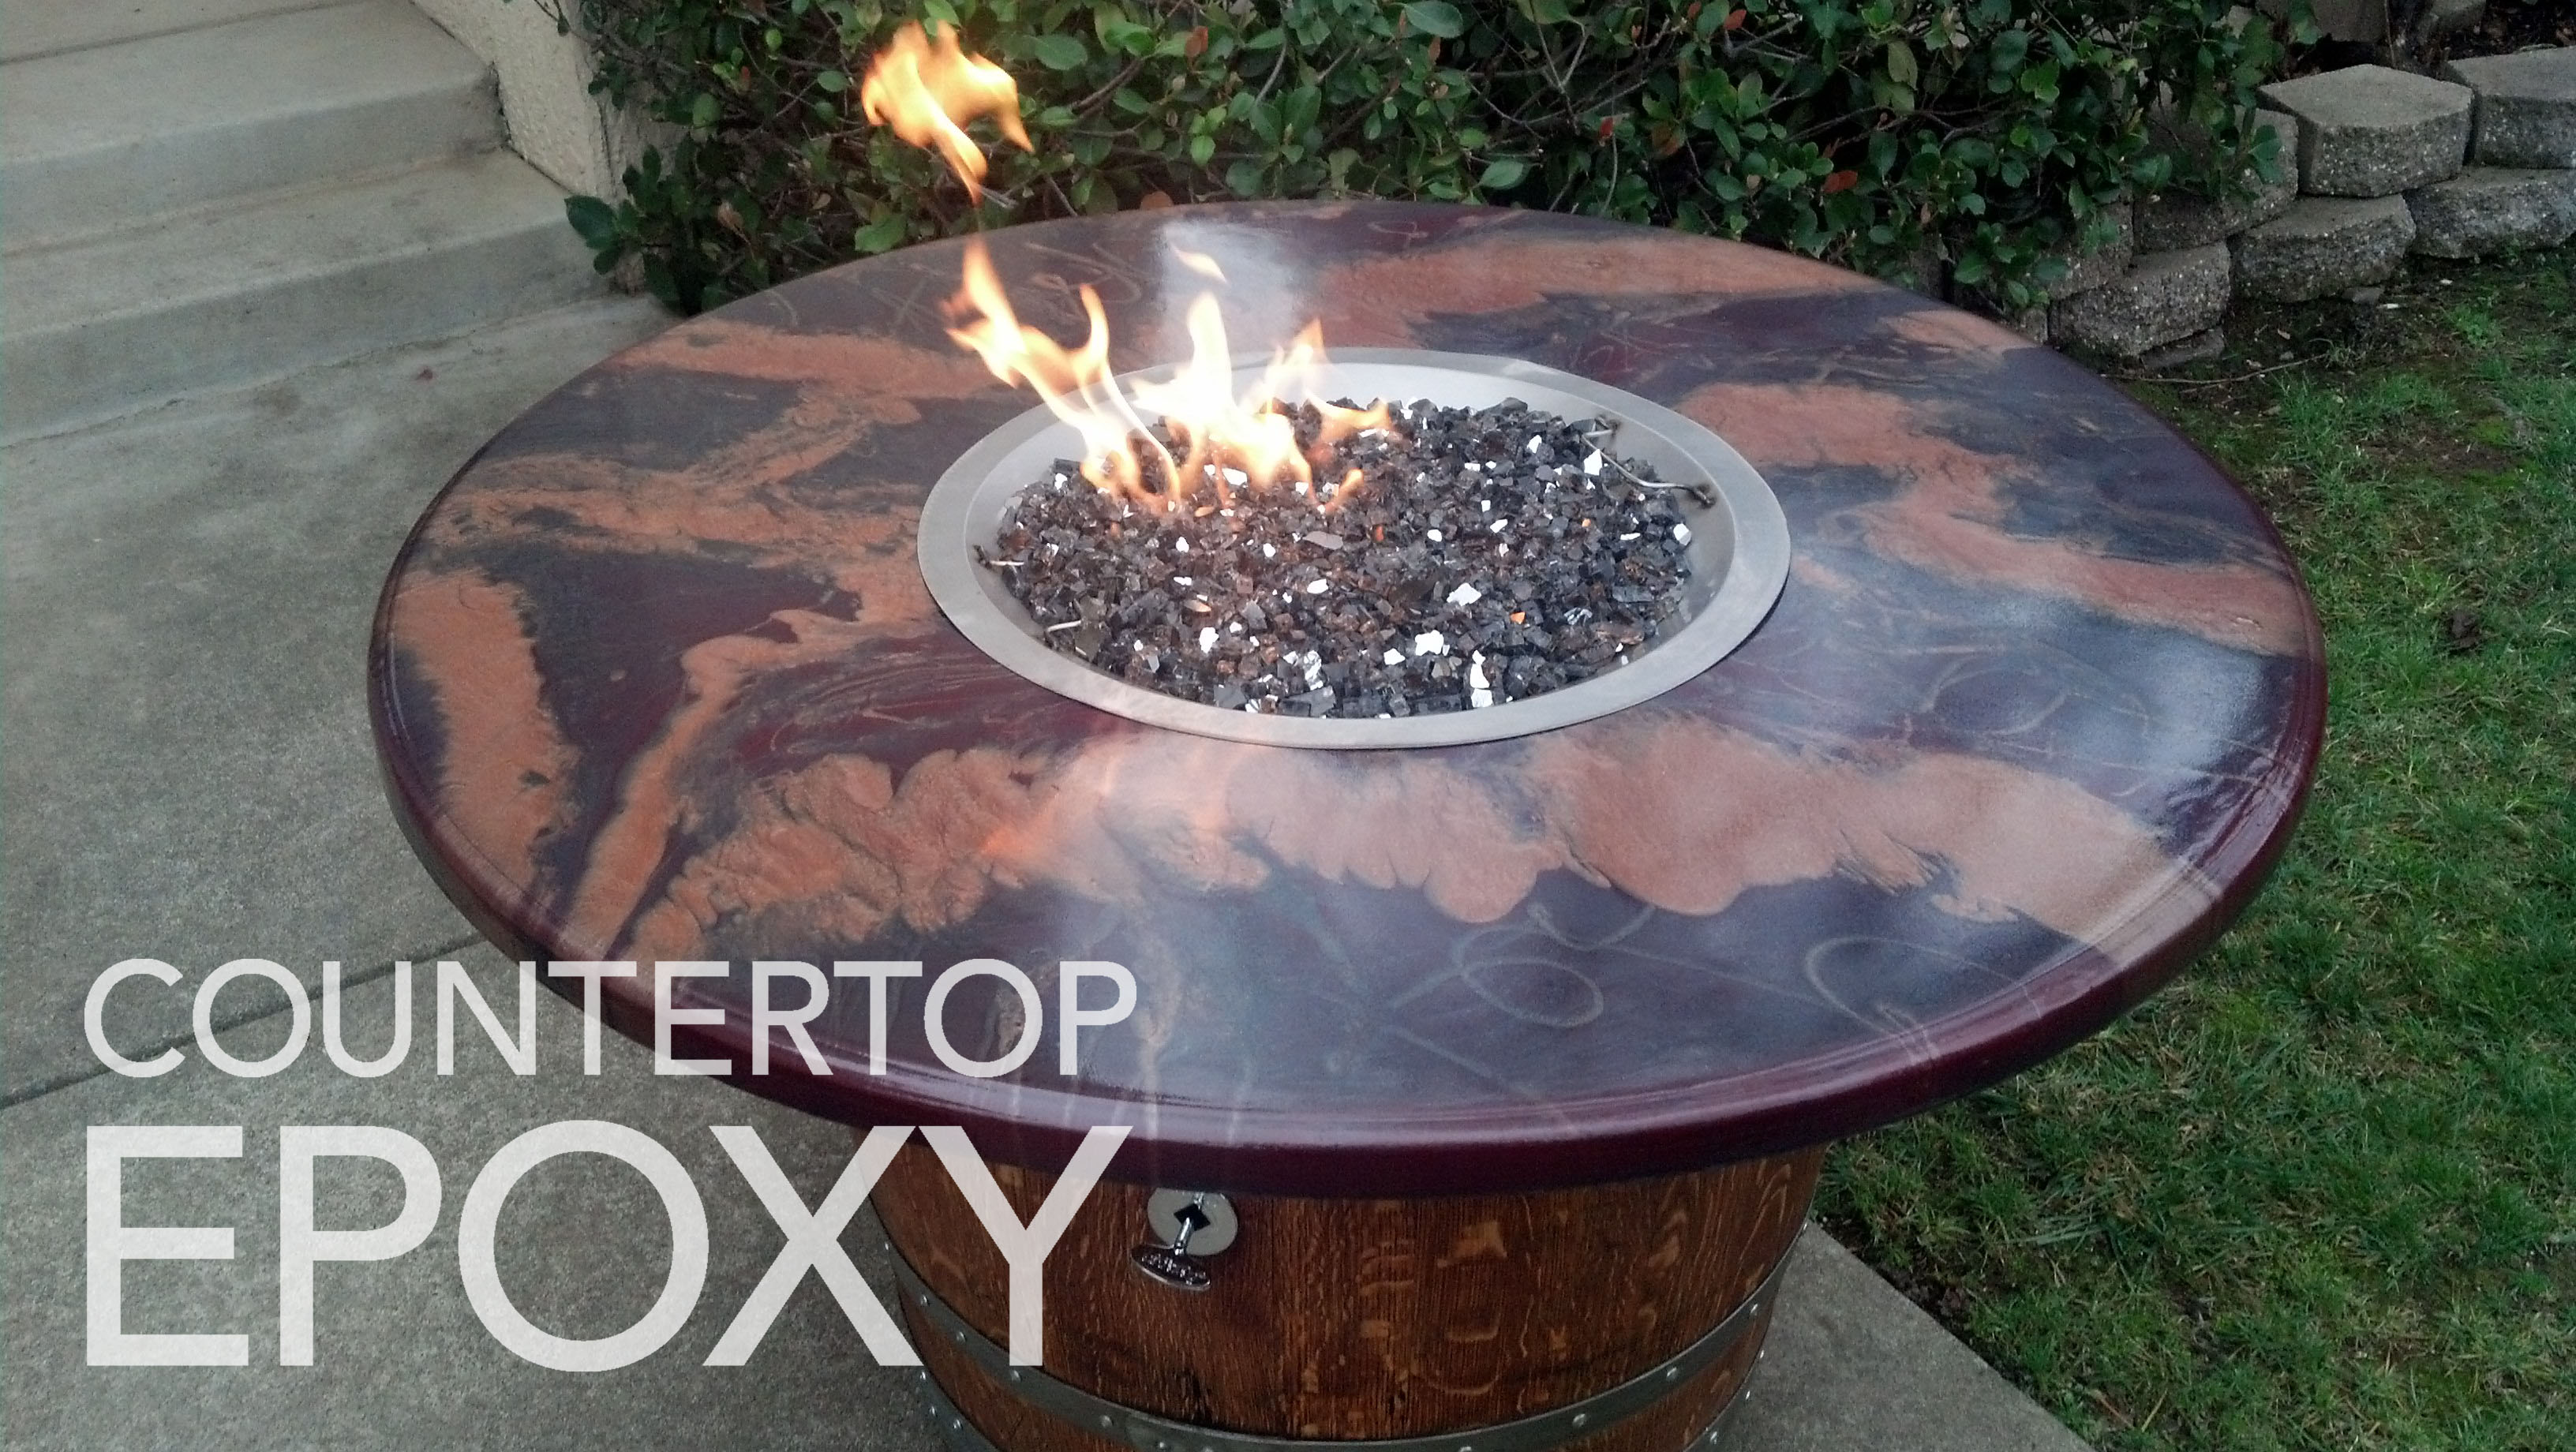 Fx Poxy epoxy countertop epoxy kit on outdoor table surrounding fire pit